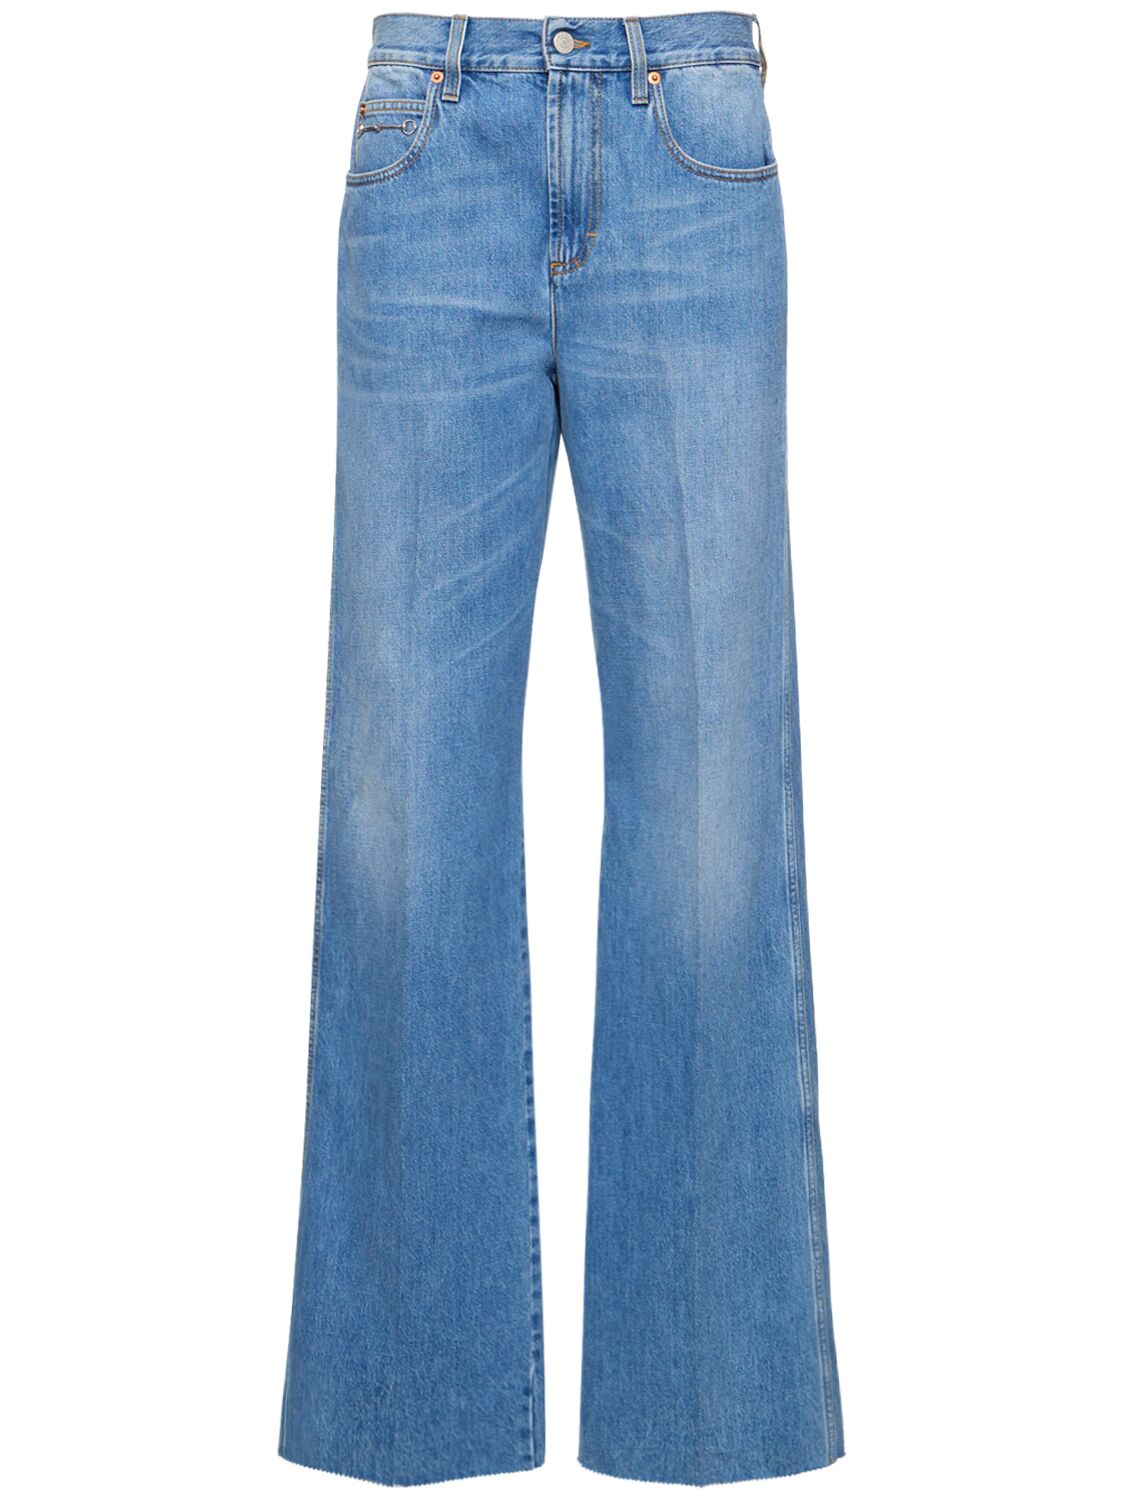 Image of Washed Cotton Denim Jeans